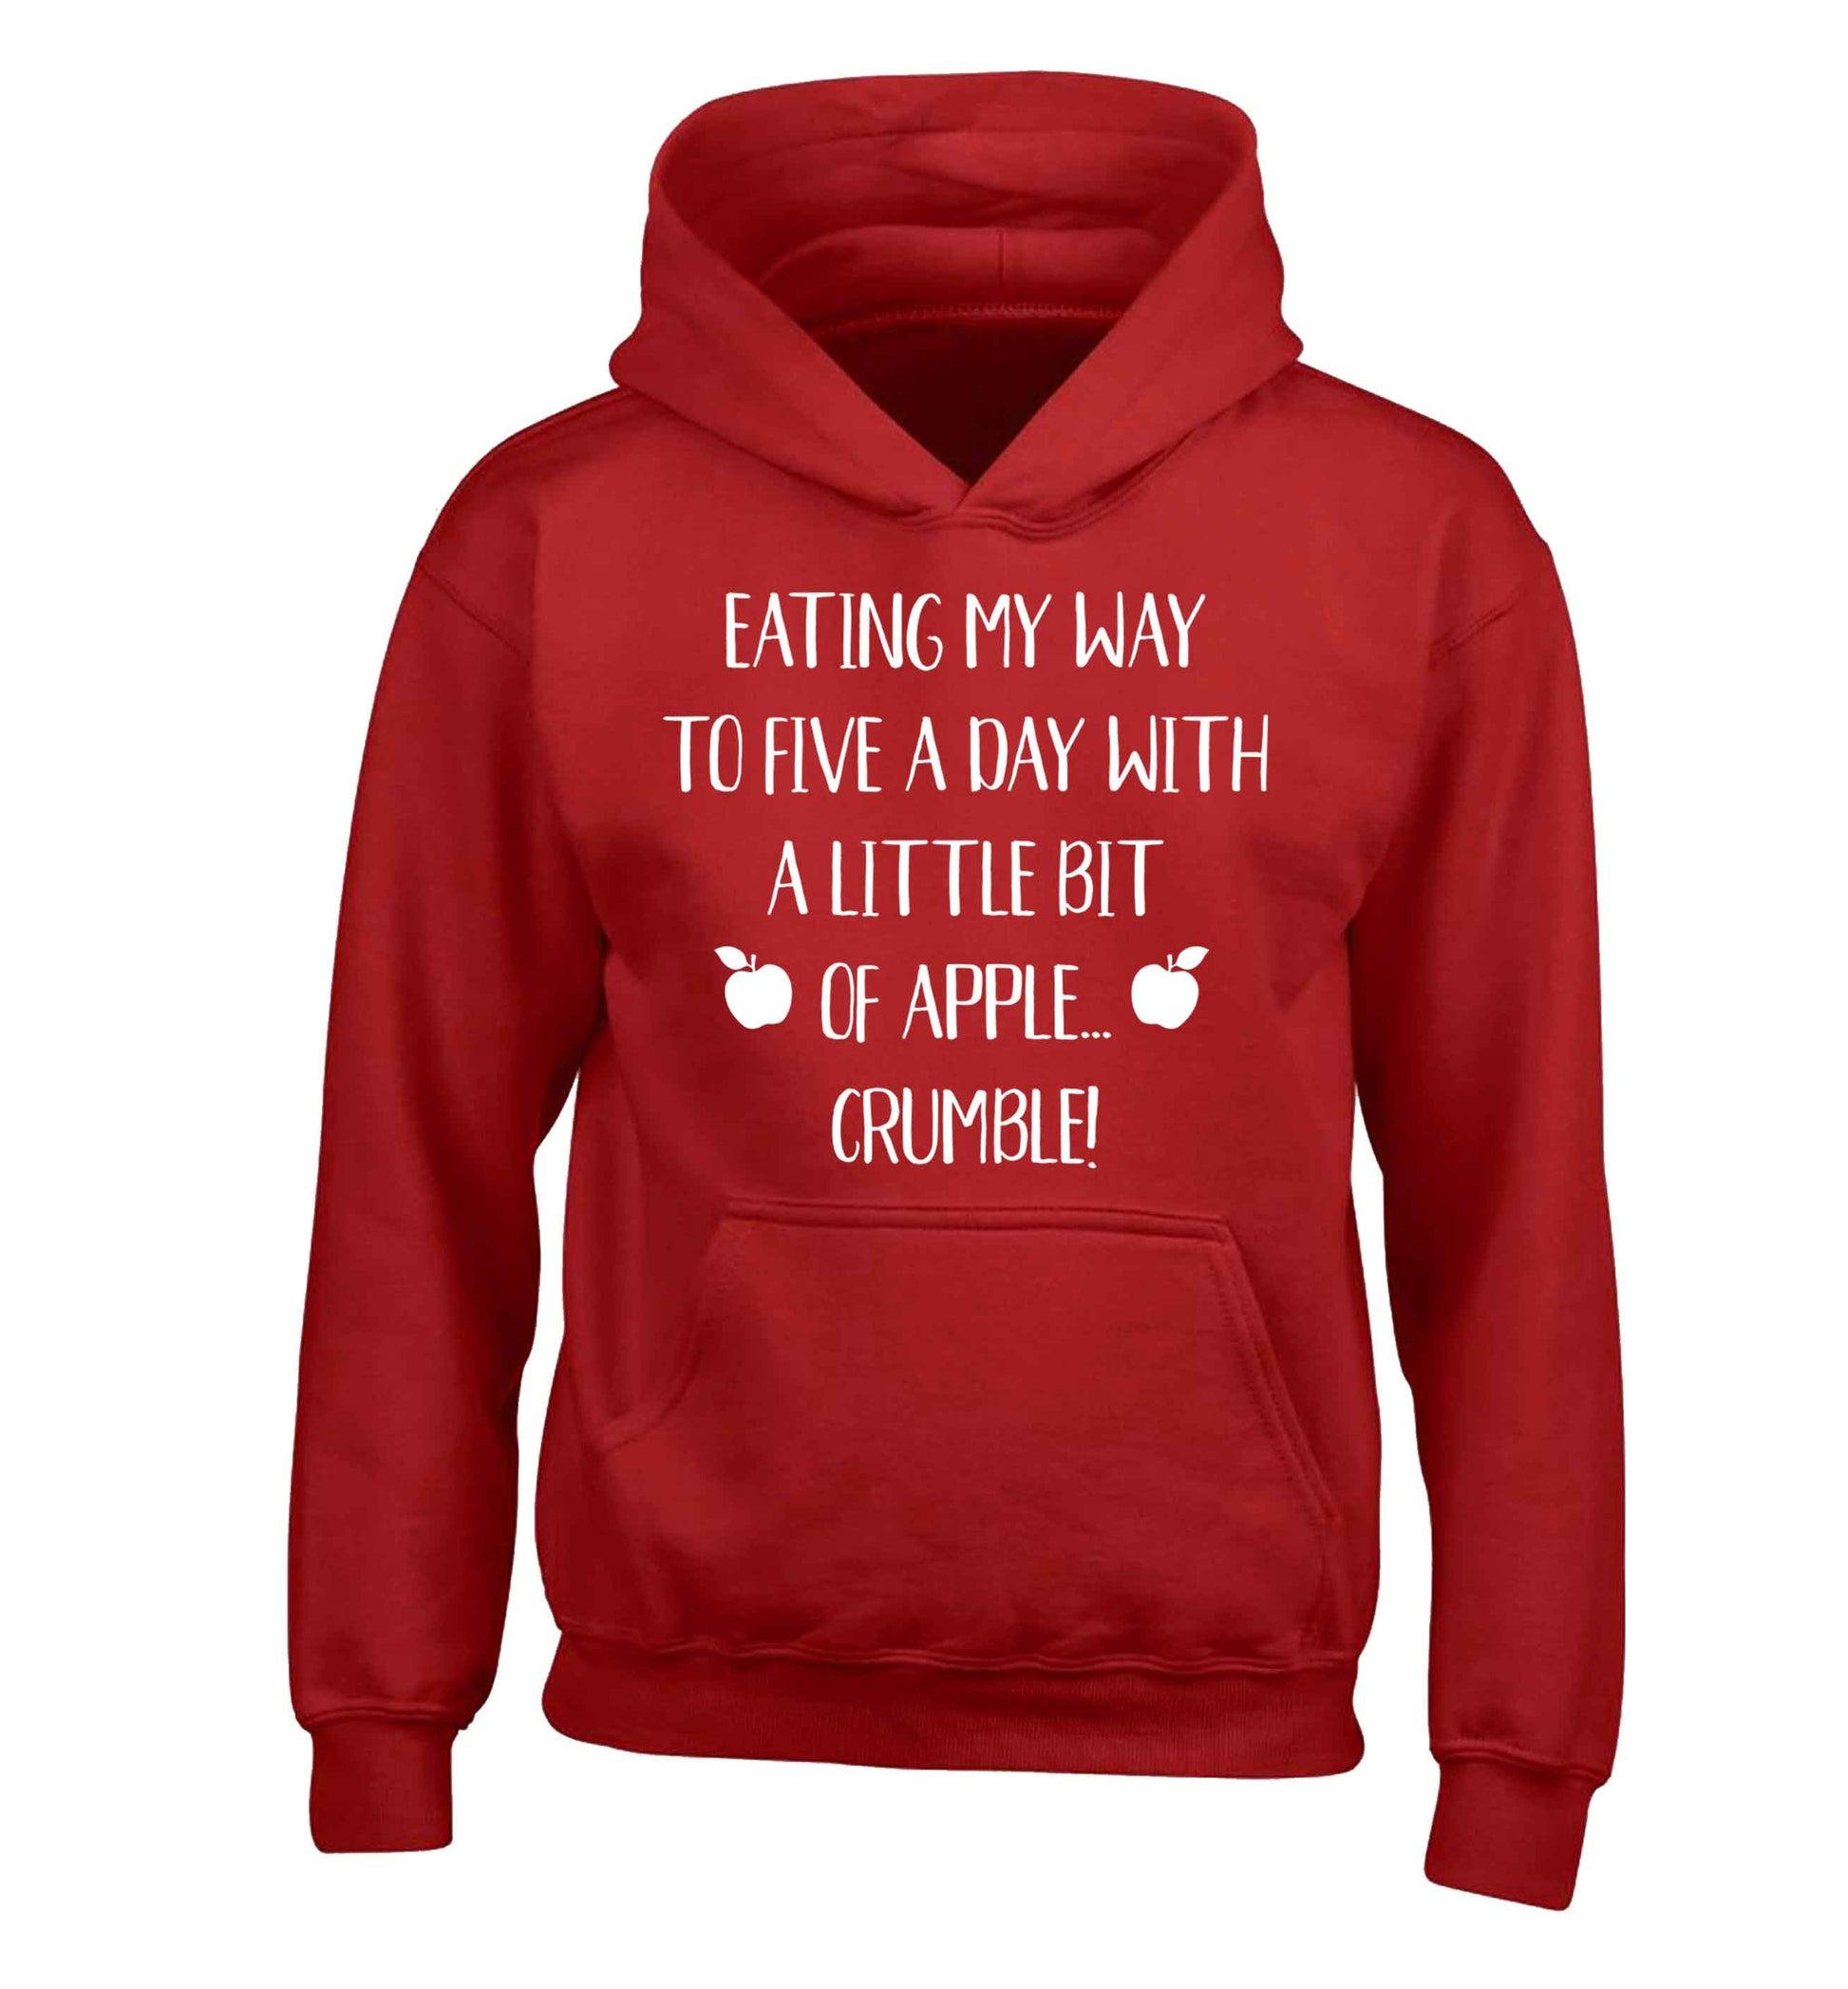 Eating my way to five a day with a little bit of apple crumble children's red hoodie 12-13 Years